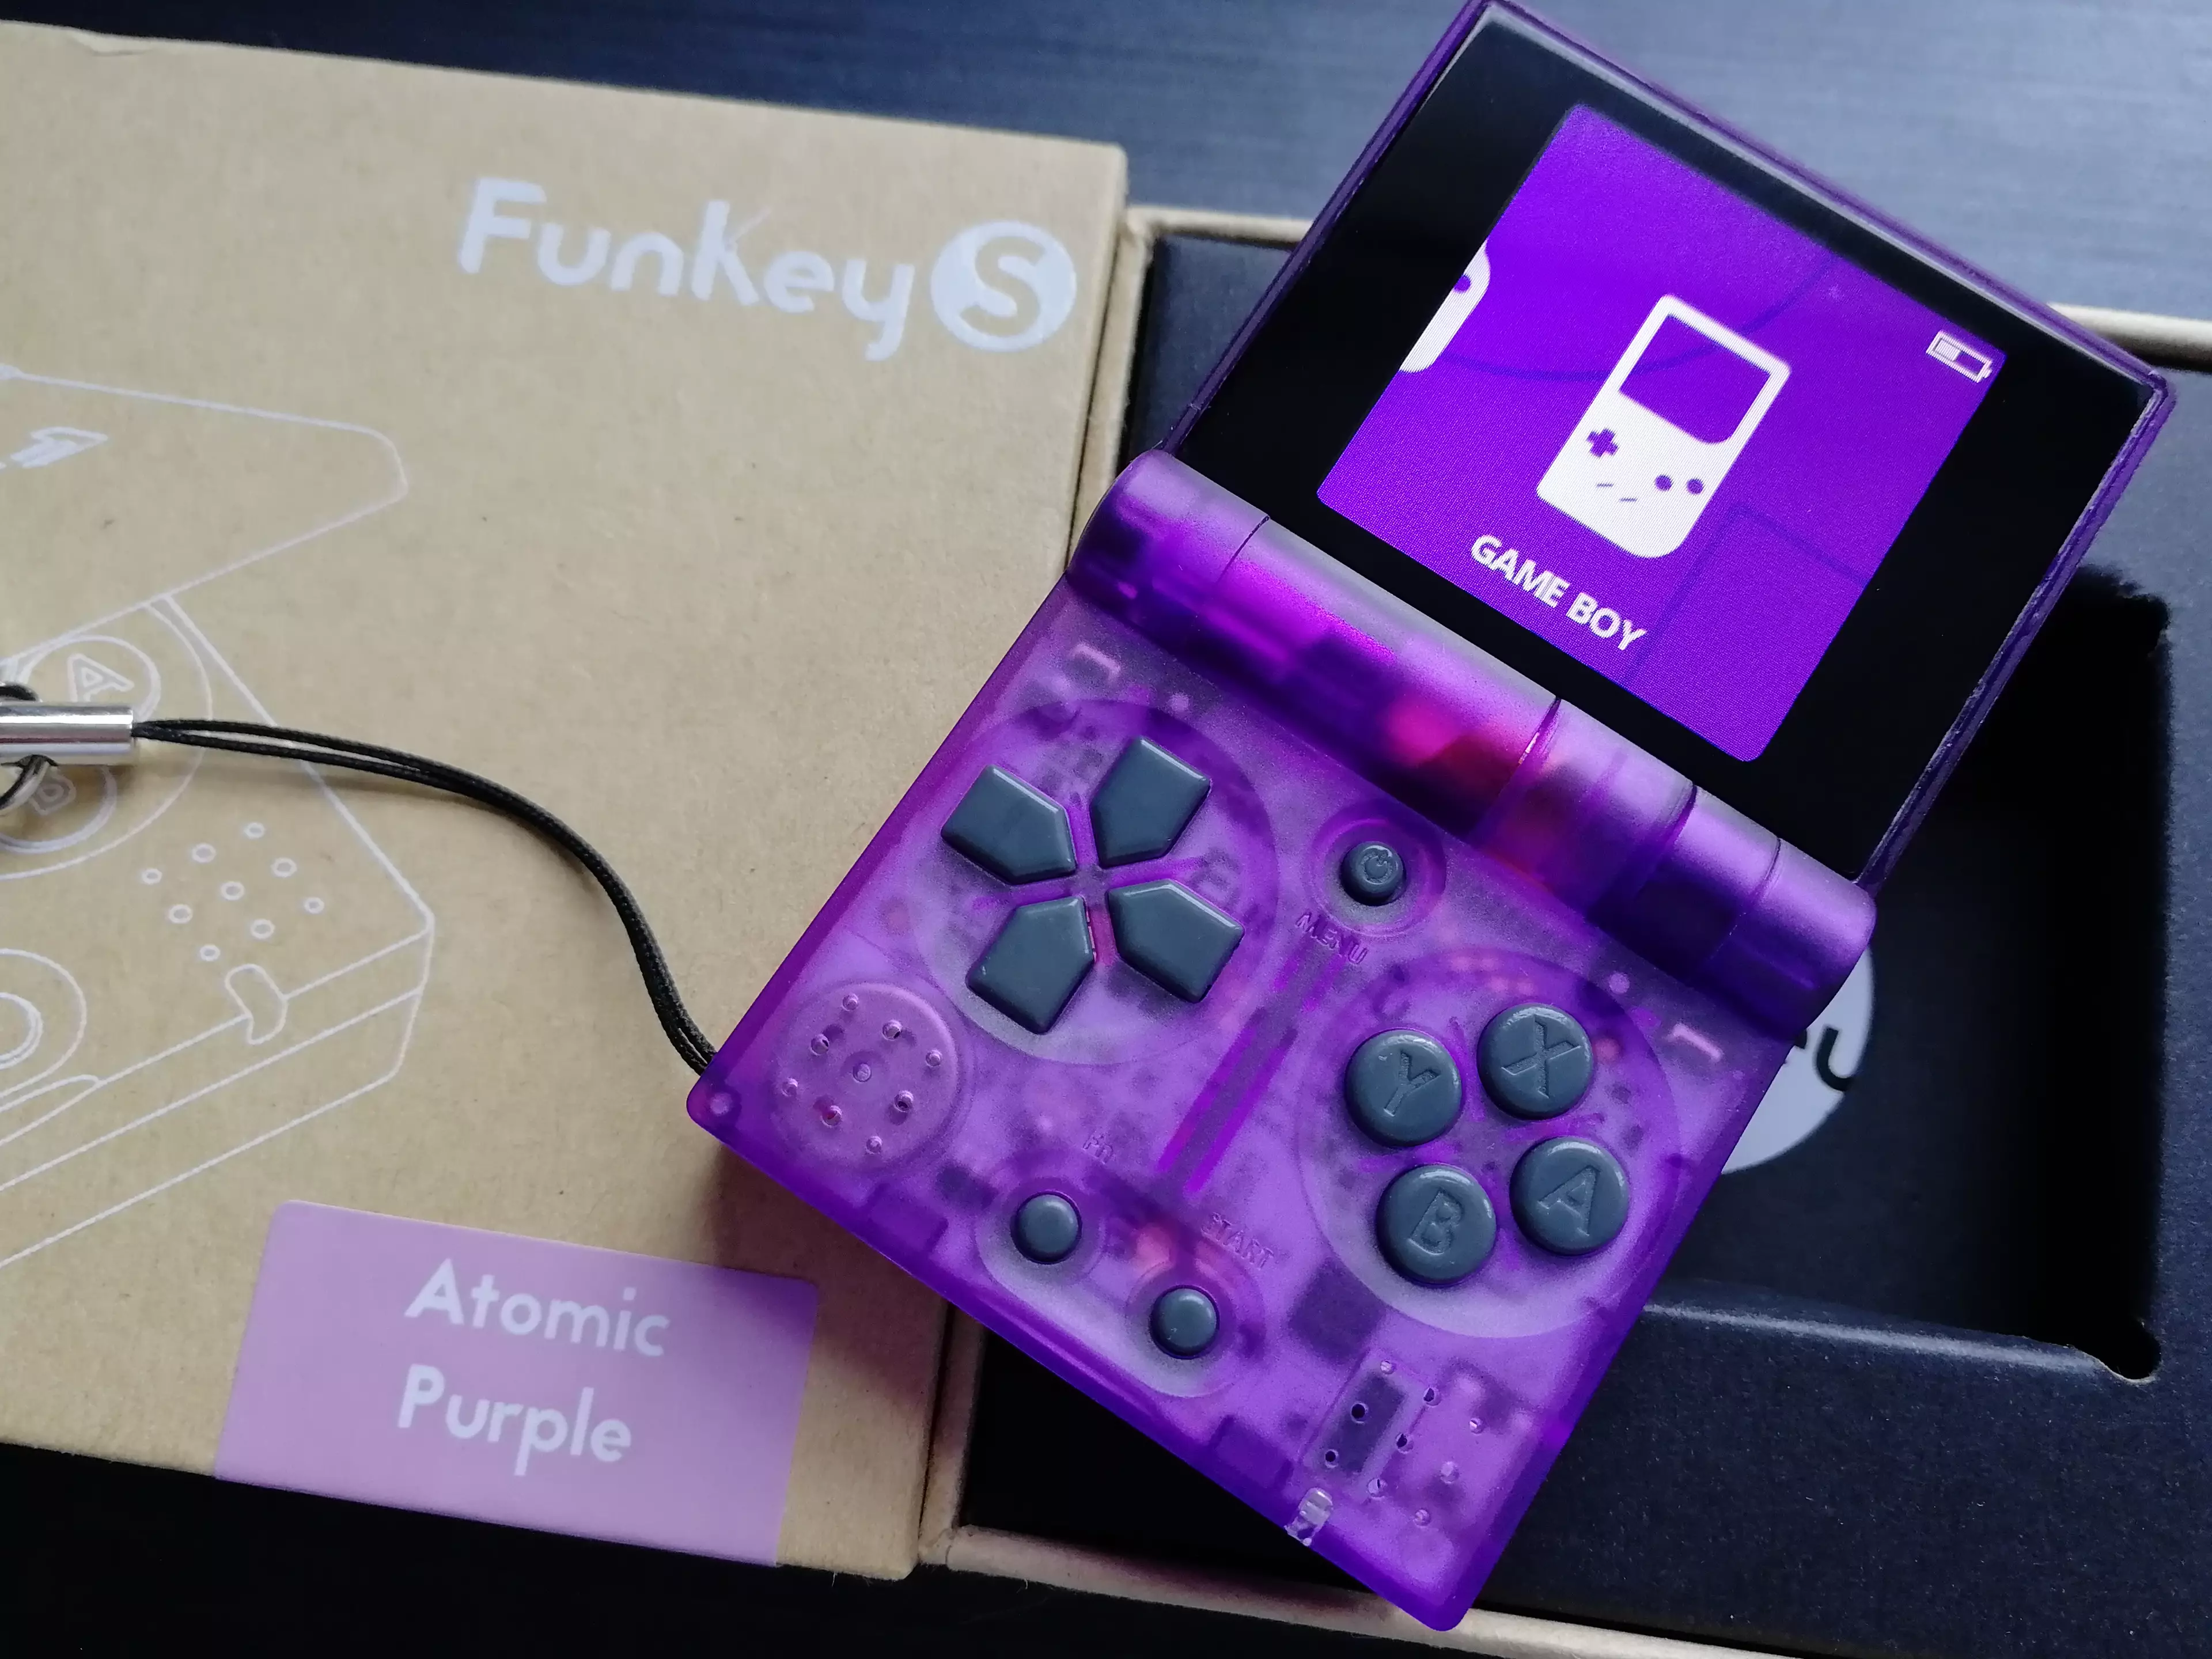 The FunKey S also comes in 'Atomic Purple' /